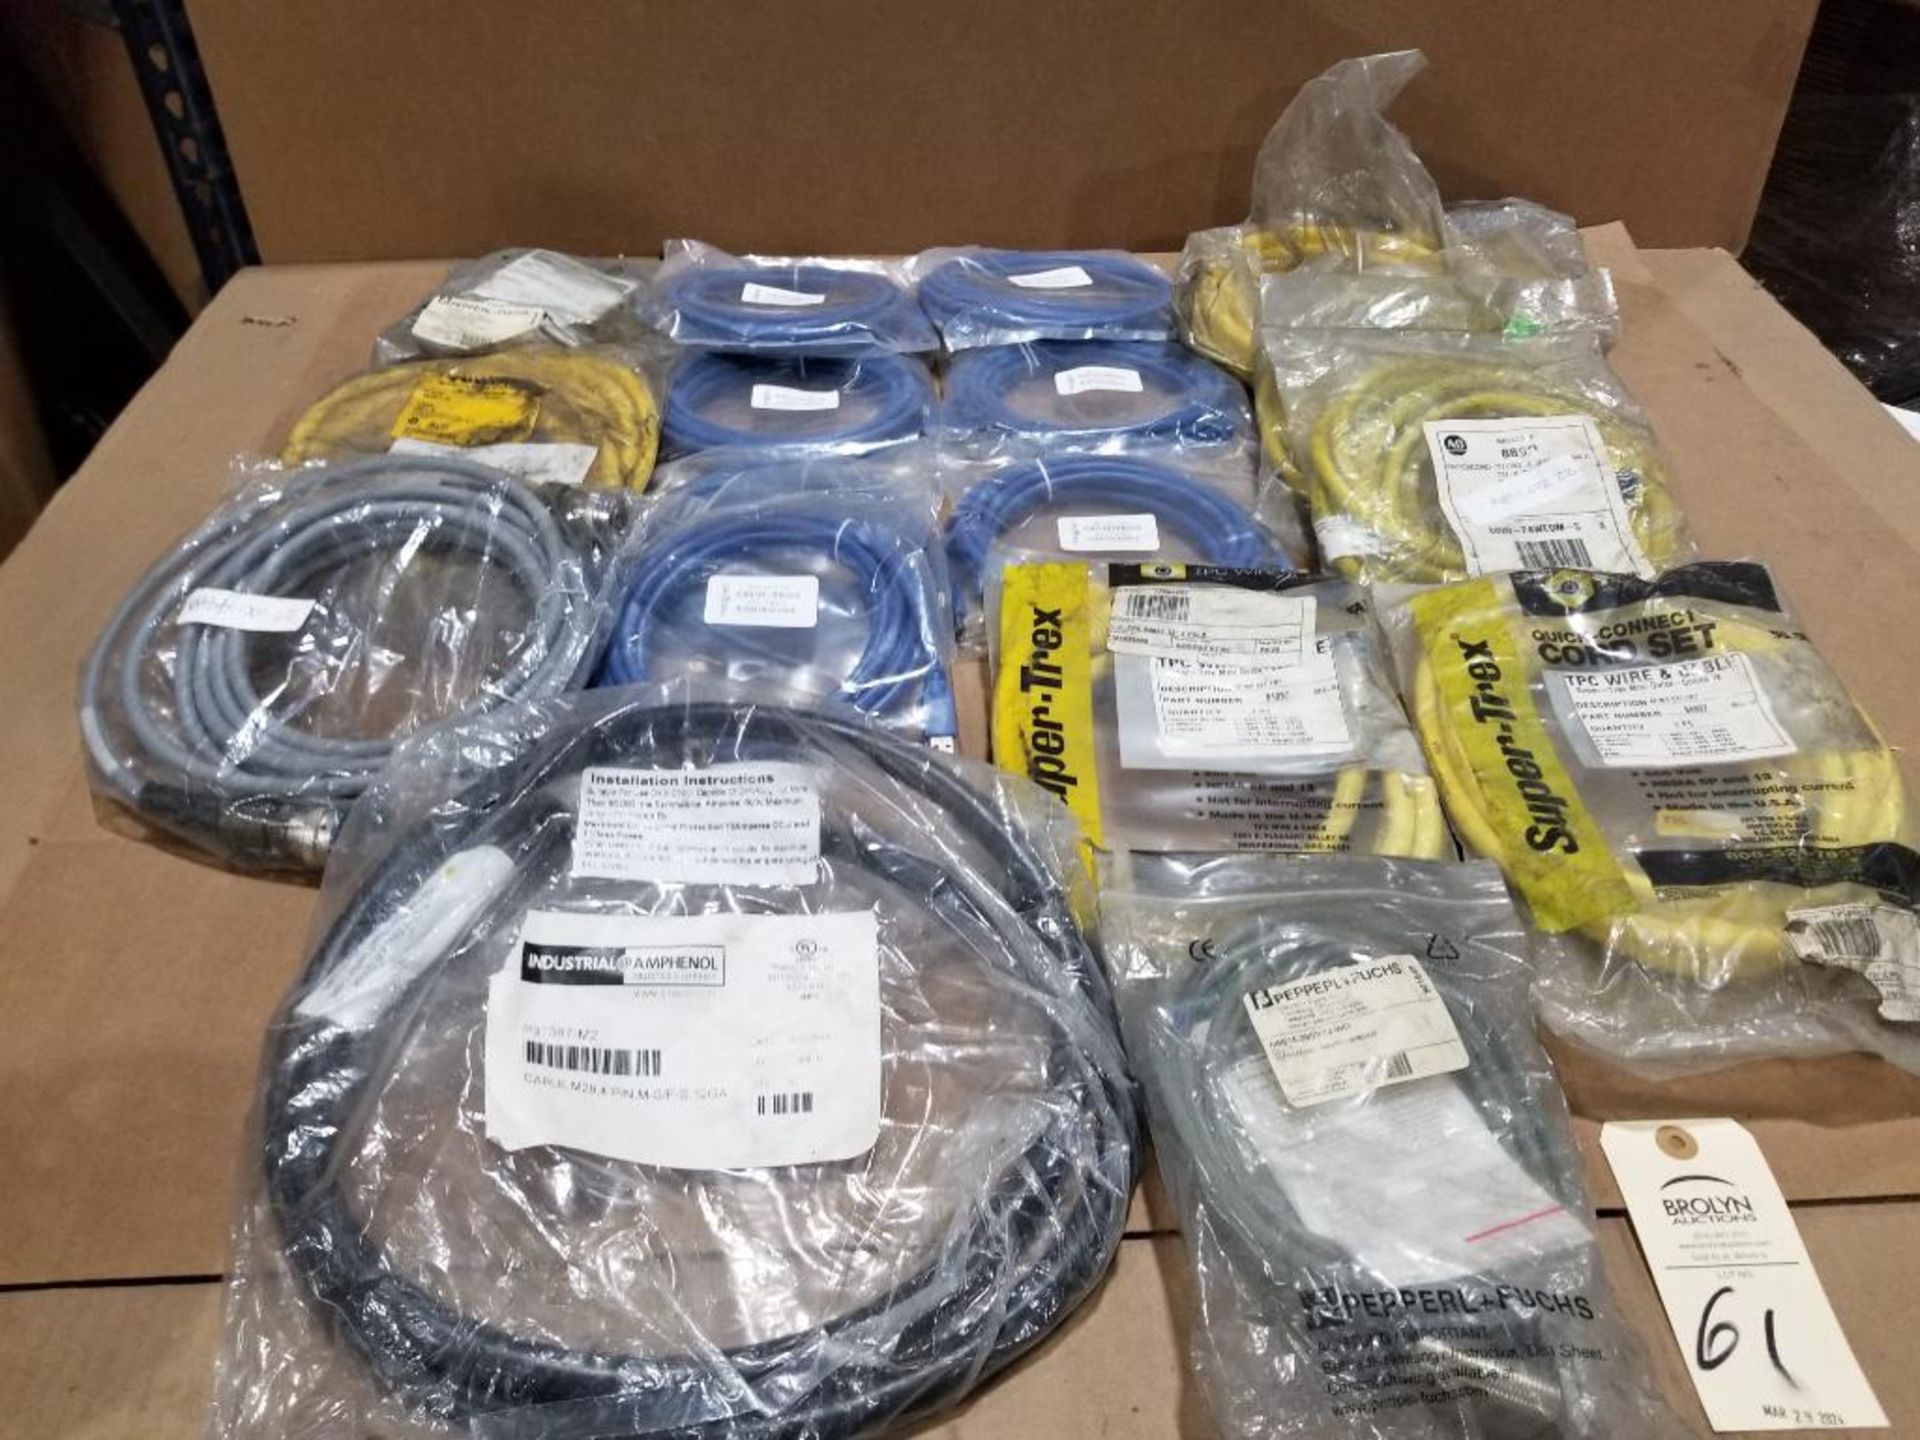 Assorted proximity sensors and interconnect cables.